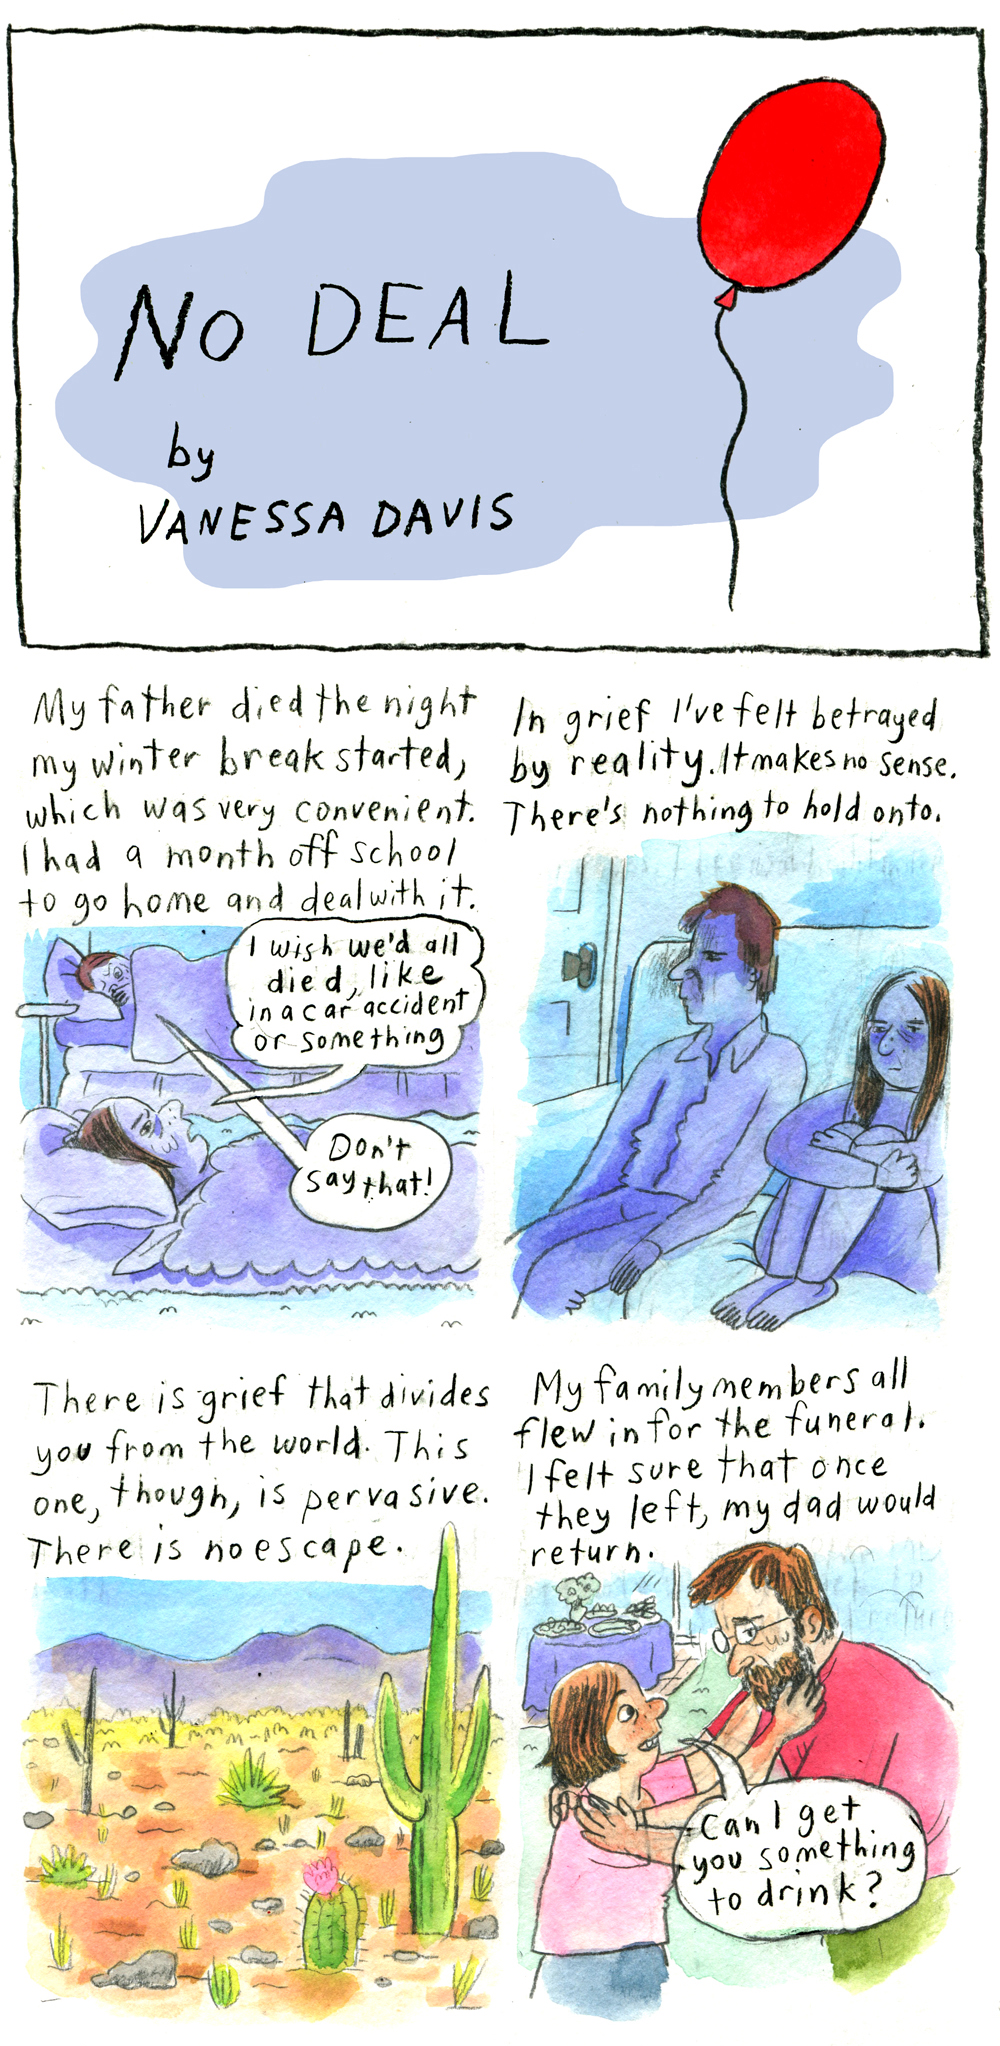 The title panel reads, "No DEAL by Vanessa Davis." The text is laid over a splash of grayish-blue. Next to it is a floating red balloon. The whole comic has 12 borderless panels, 2 across in 6 rows (not including the title). 1. Vanessa begins narrating, "My father died the night my winter break started, which was very convenient. I had a month off school to go home and deal with it." Vanessa, colored entirely in blue, except for her brown hair, lies in bed with the blanket drawn up to her neck. Her hair is cut in an above-the-shoulder bob. She is frowning and her brows are furrowed. She says, "I wish we'd all died, like in a car accident or something." Someone lies in another bed across the room, also colored in blue except for their short brown hair. Their blanket is drawn far enough up to cover their chin. Their hand obscures part of their face. Their eyebrows are furrowed in concern. They reply, "Don't say that!" 2. Vanessa as narrator: "In grief I've felt betrayed by reality. It makes no sense. There's nothing to hold onto." Vanessa sits on a couch hugging her knees to her chest. Her hair is past shoulder length now. She is still colored entirely in blue except for her hair. She sits next to a man with short brown hair, also colored in blue - probably the person from before. They both look older. They have empty, solemn expressions. 3. "There is grief that divides you from the world. This one, though, is pervasive. There is no escape." A desert is dotted with rocks, scattered shrubs, and cacti. There is a mountain in the background. 4. "My family members all flew in for the funeral. I felt sure that once they left, my dad would return." Vanessa, in full color, is clearly young, perhaps in middle or high school. Her hair is in the above-the-shoulder bob. She wears a pink t-shirt and blue shorts. She reaches up and touches the beard of a man bending down to hug her. He wears glasses, a red t-shirt, and green pants. Vanessa asks, smiling, "Can I get you something to drink?" The man does not smile back. 